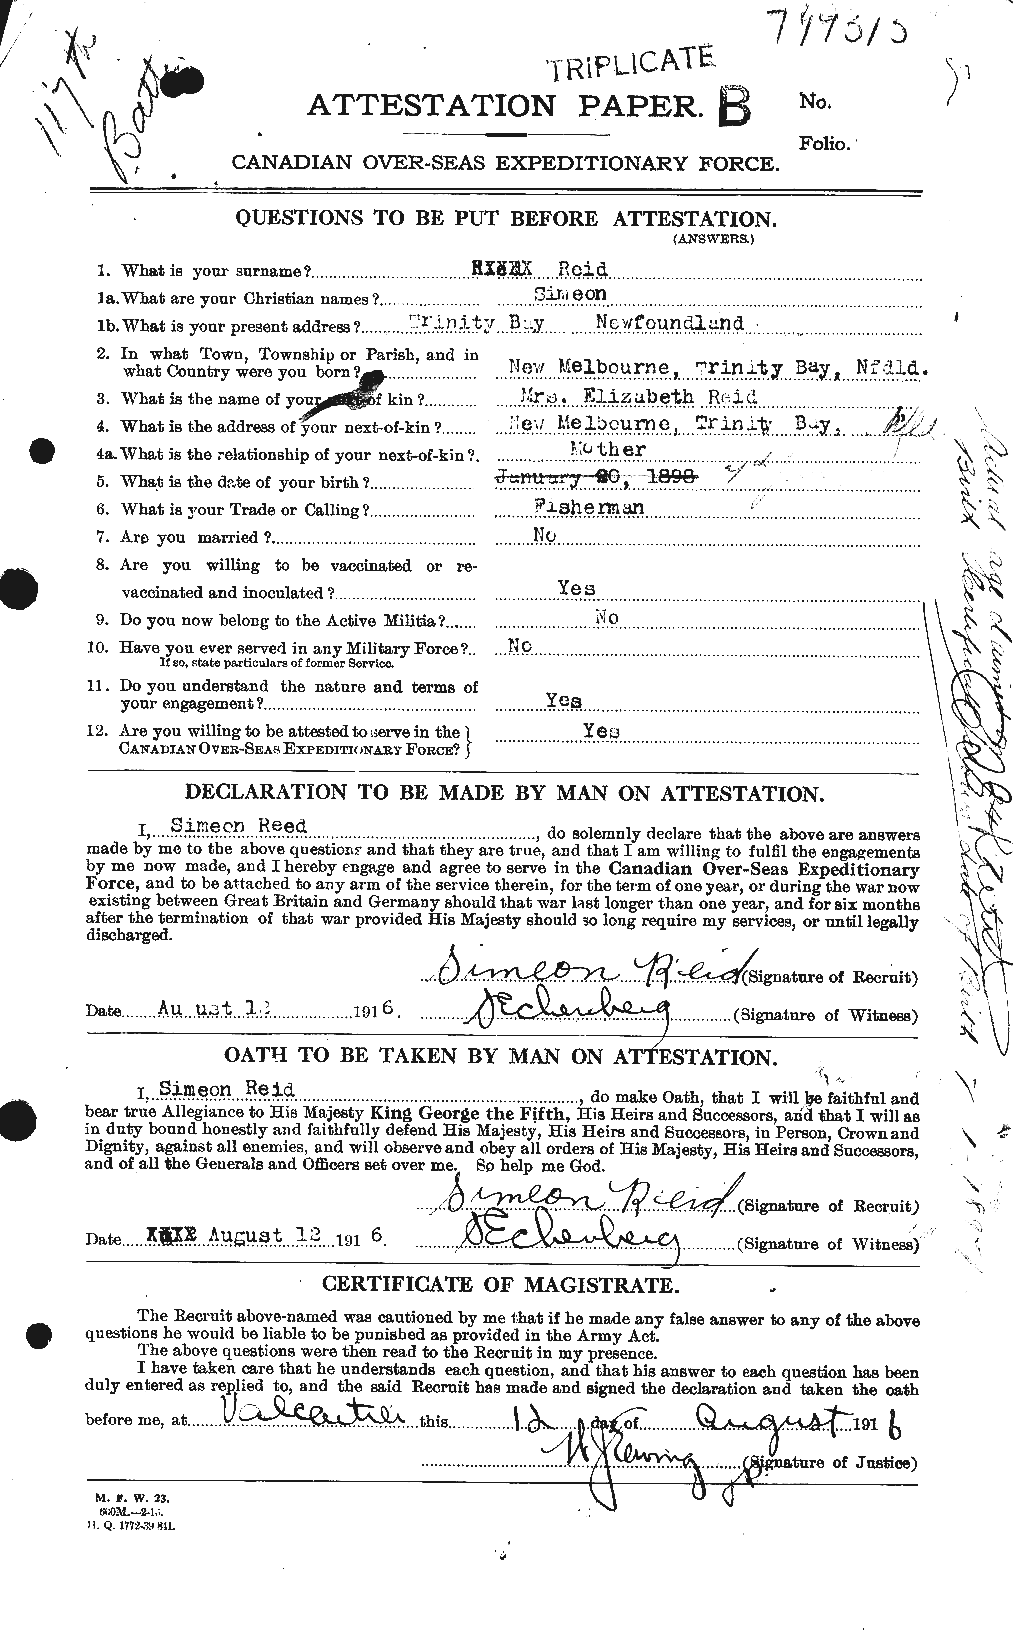 Personnel Records of the First World War - CEF 601960a